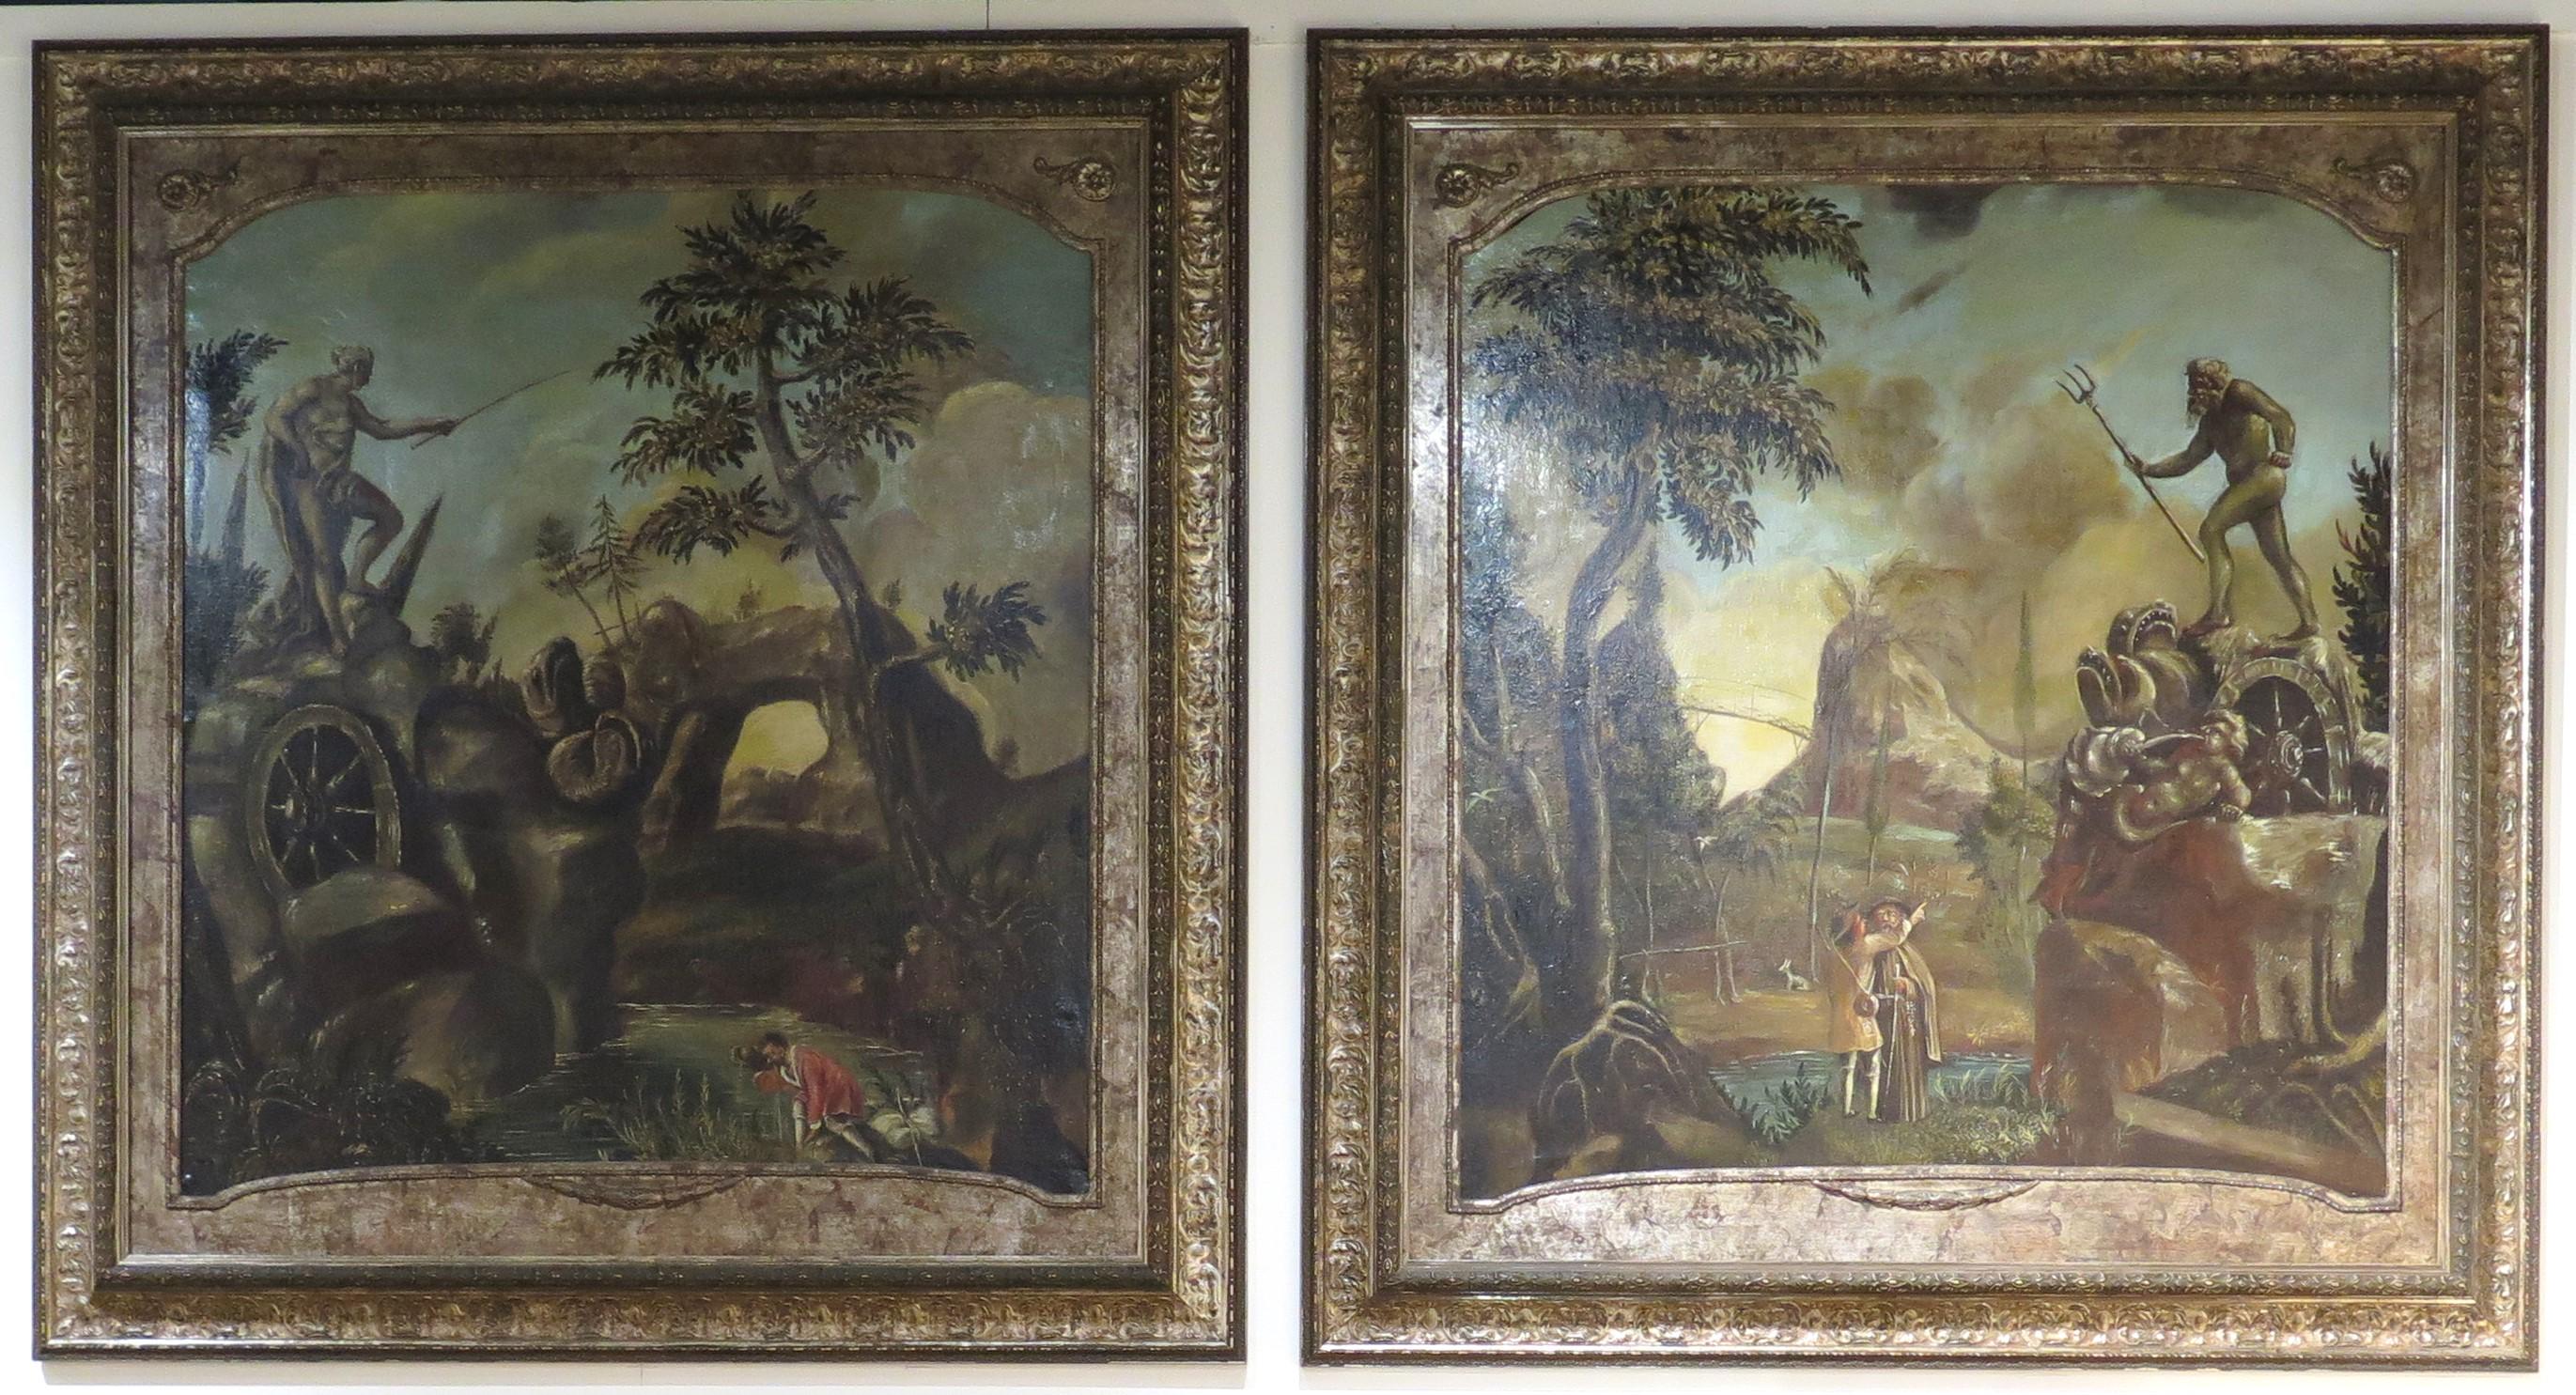 A set of four (4) Late 18th Century / Early 19th Century allegorical paintings amongst landscapes amongst classical ruins, relived frames contemporary pictures most likely. Italian.

MEASUREMENTS:

Frame 53